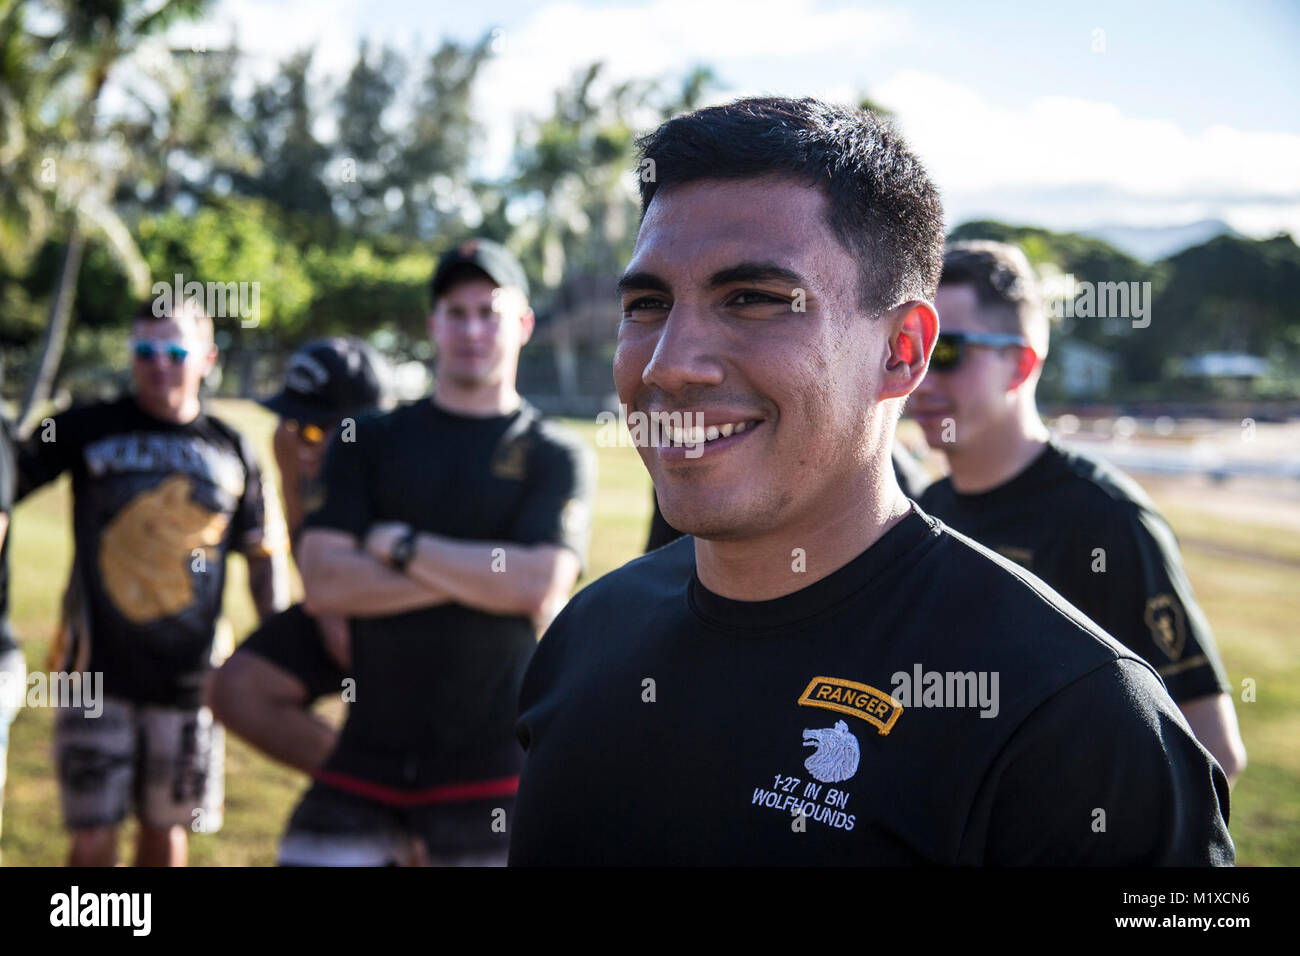 U.S. Army Capt. David Zelaya, assigned to 1st Battalion, 27th Infantry Regiment, 2nd Infantry Brigade Combat Team, 25th Infantry Division listens to group introductions before the start of the team-building exercise in Keehi Lagoon, Honolulu, Hi., Jan. 30, 2018. In an effort to strengthen international relationships, United States Army Pacific hosted personnel from the British Army to participate in a team building exercise facilitating outrigger canoeing. (U.S. Army Stock Photo